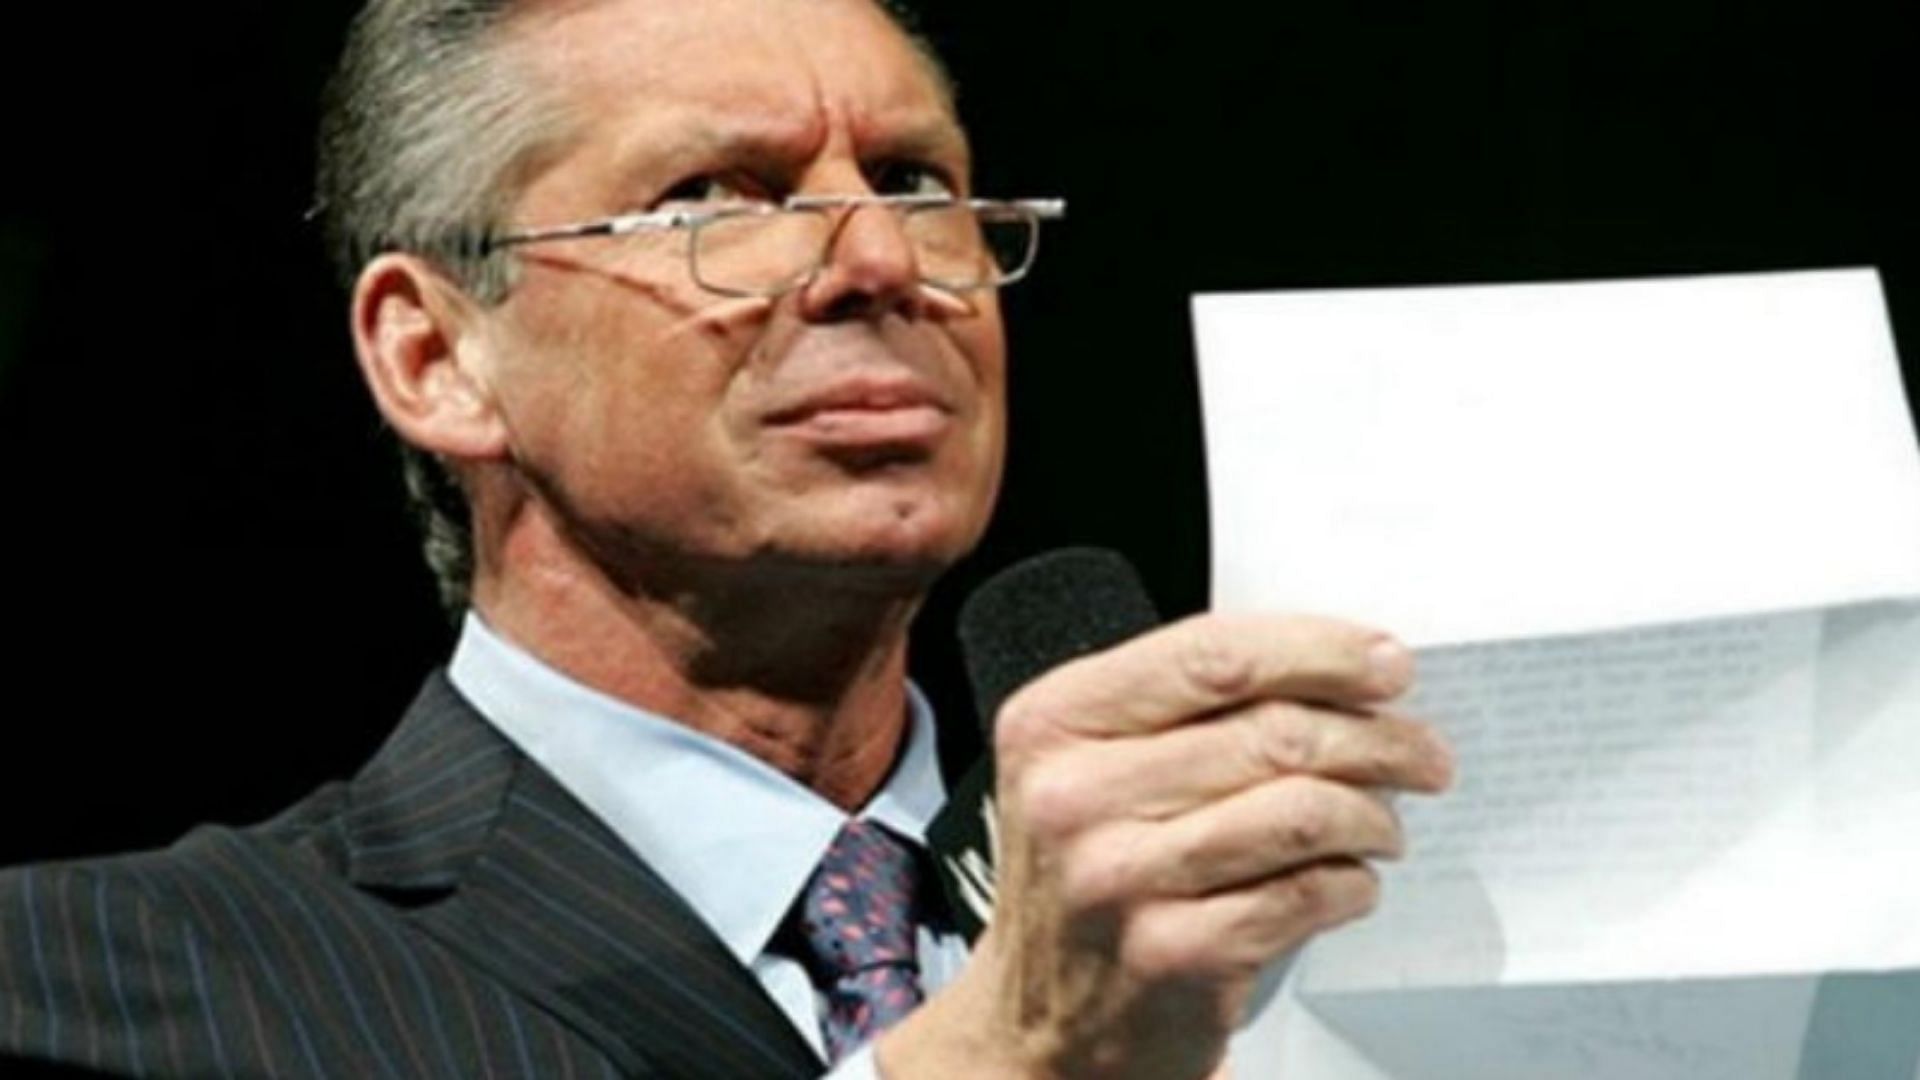 Vince McMahon often makes late changes to WWE scripts